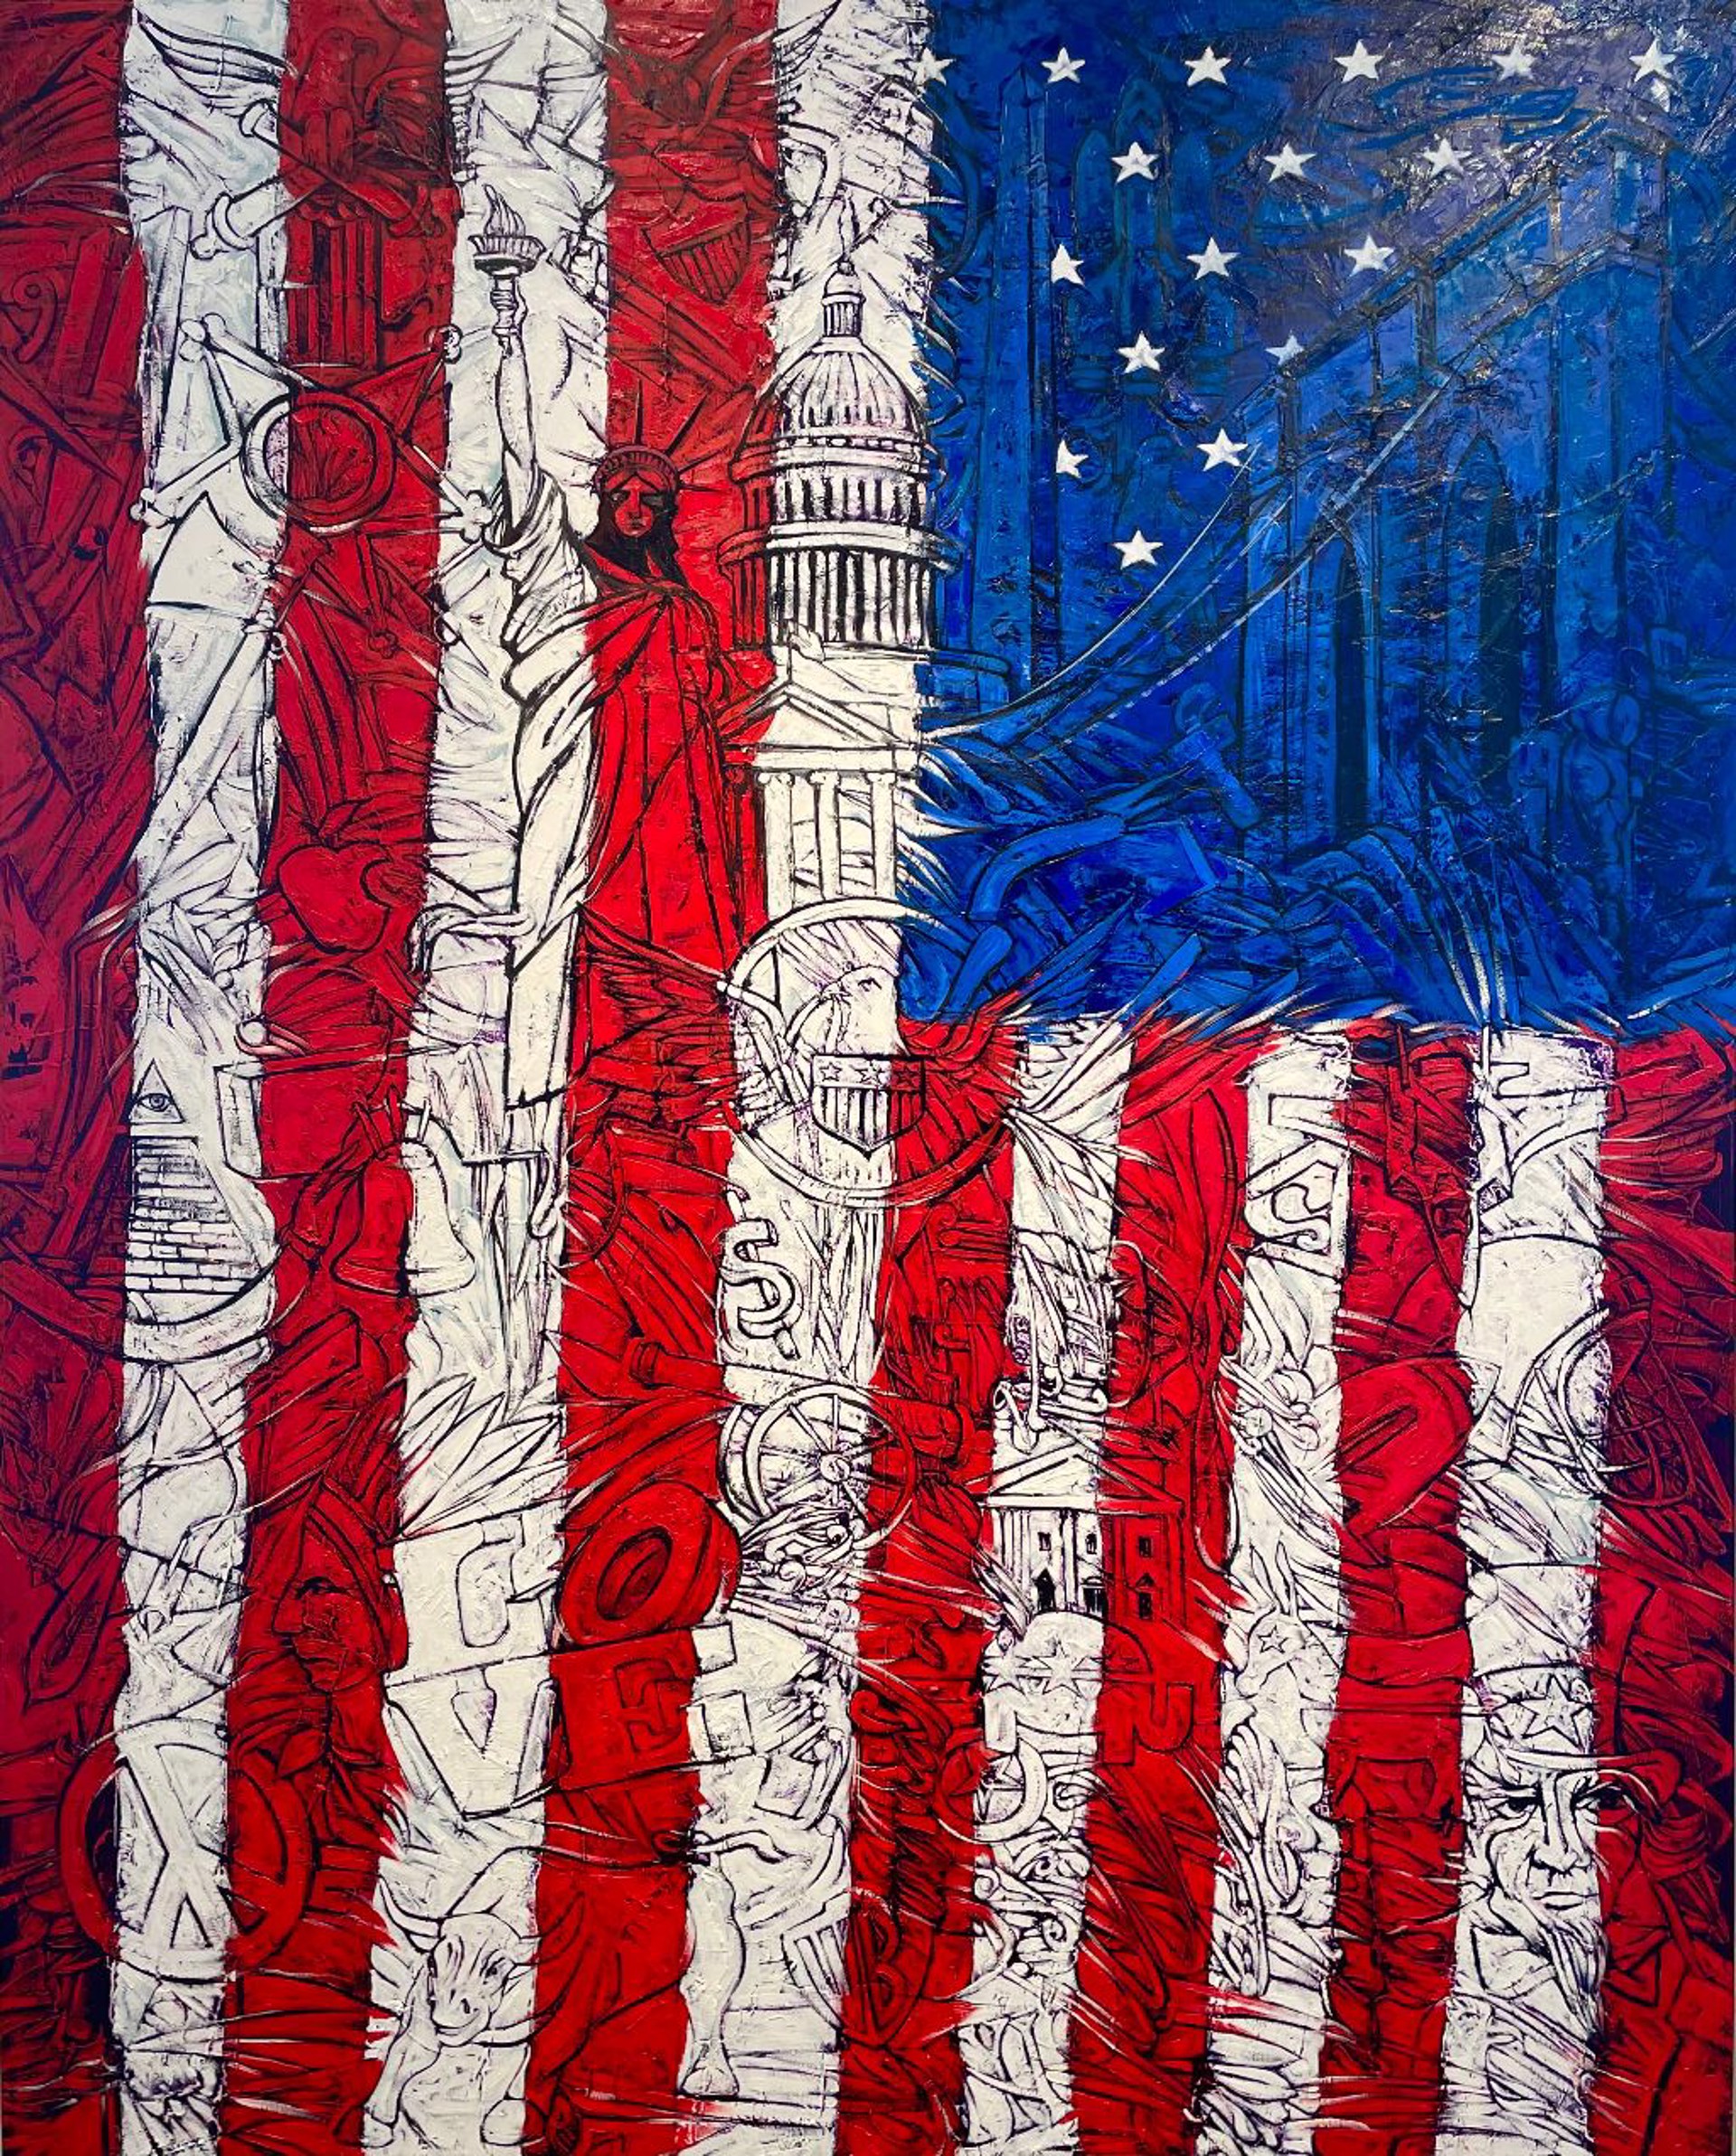 The Stars and Stripes, Old Glory, The Star Spangled Banner by Fredy Villamil